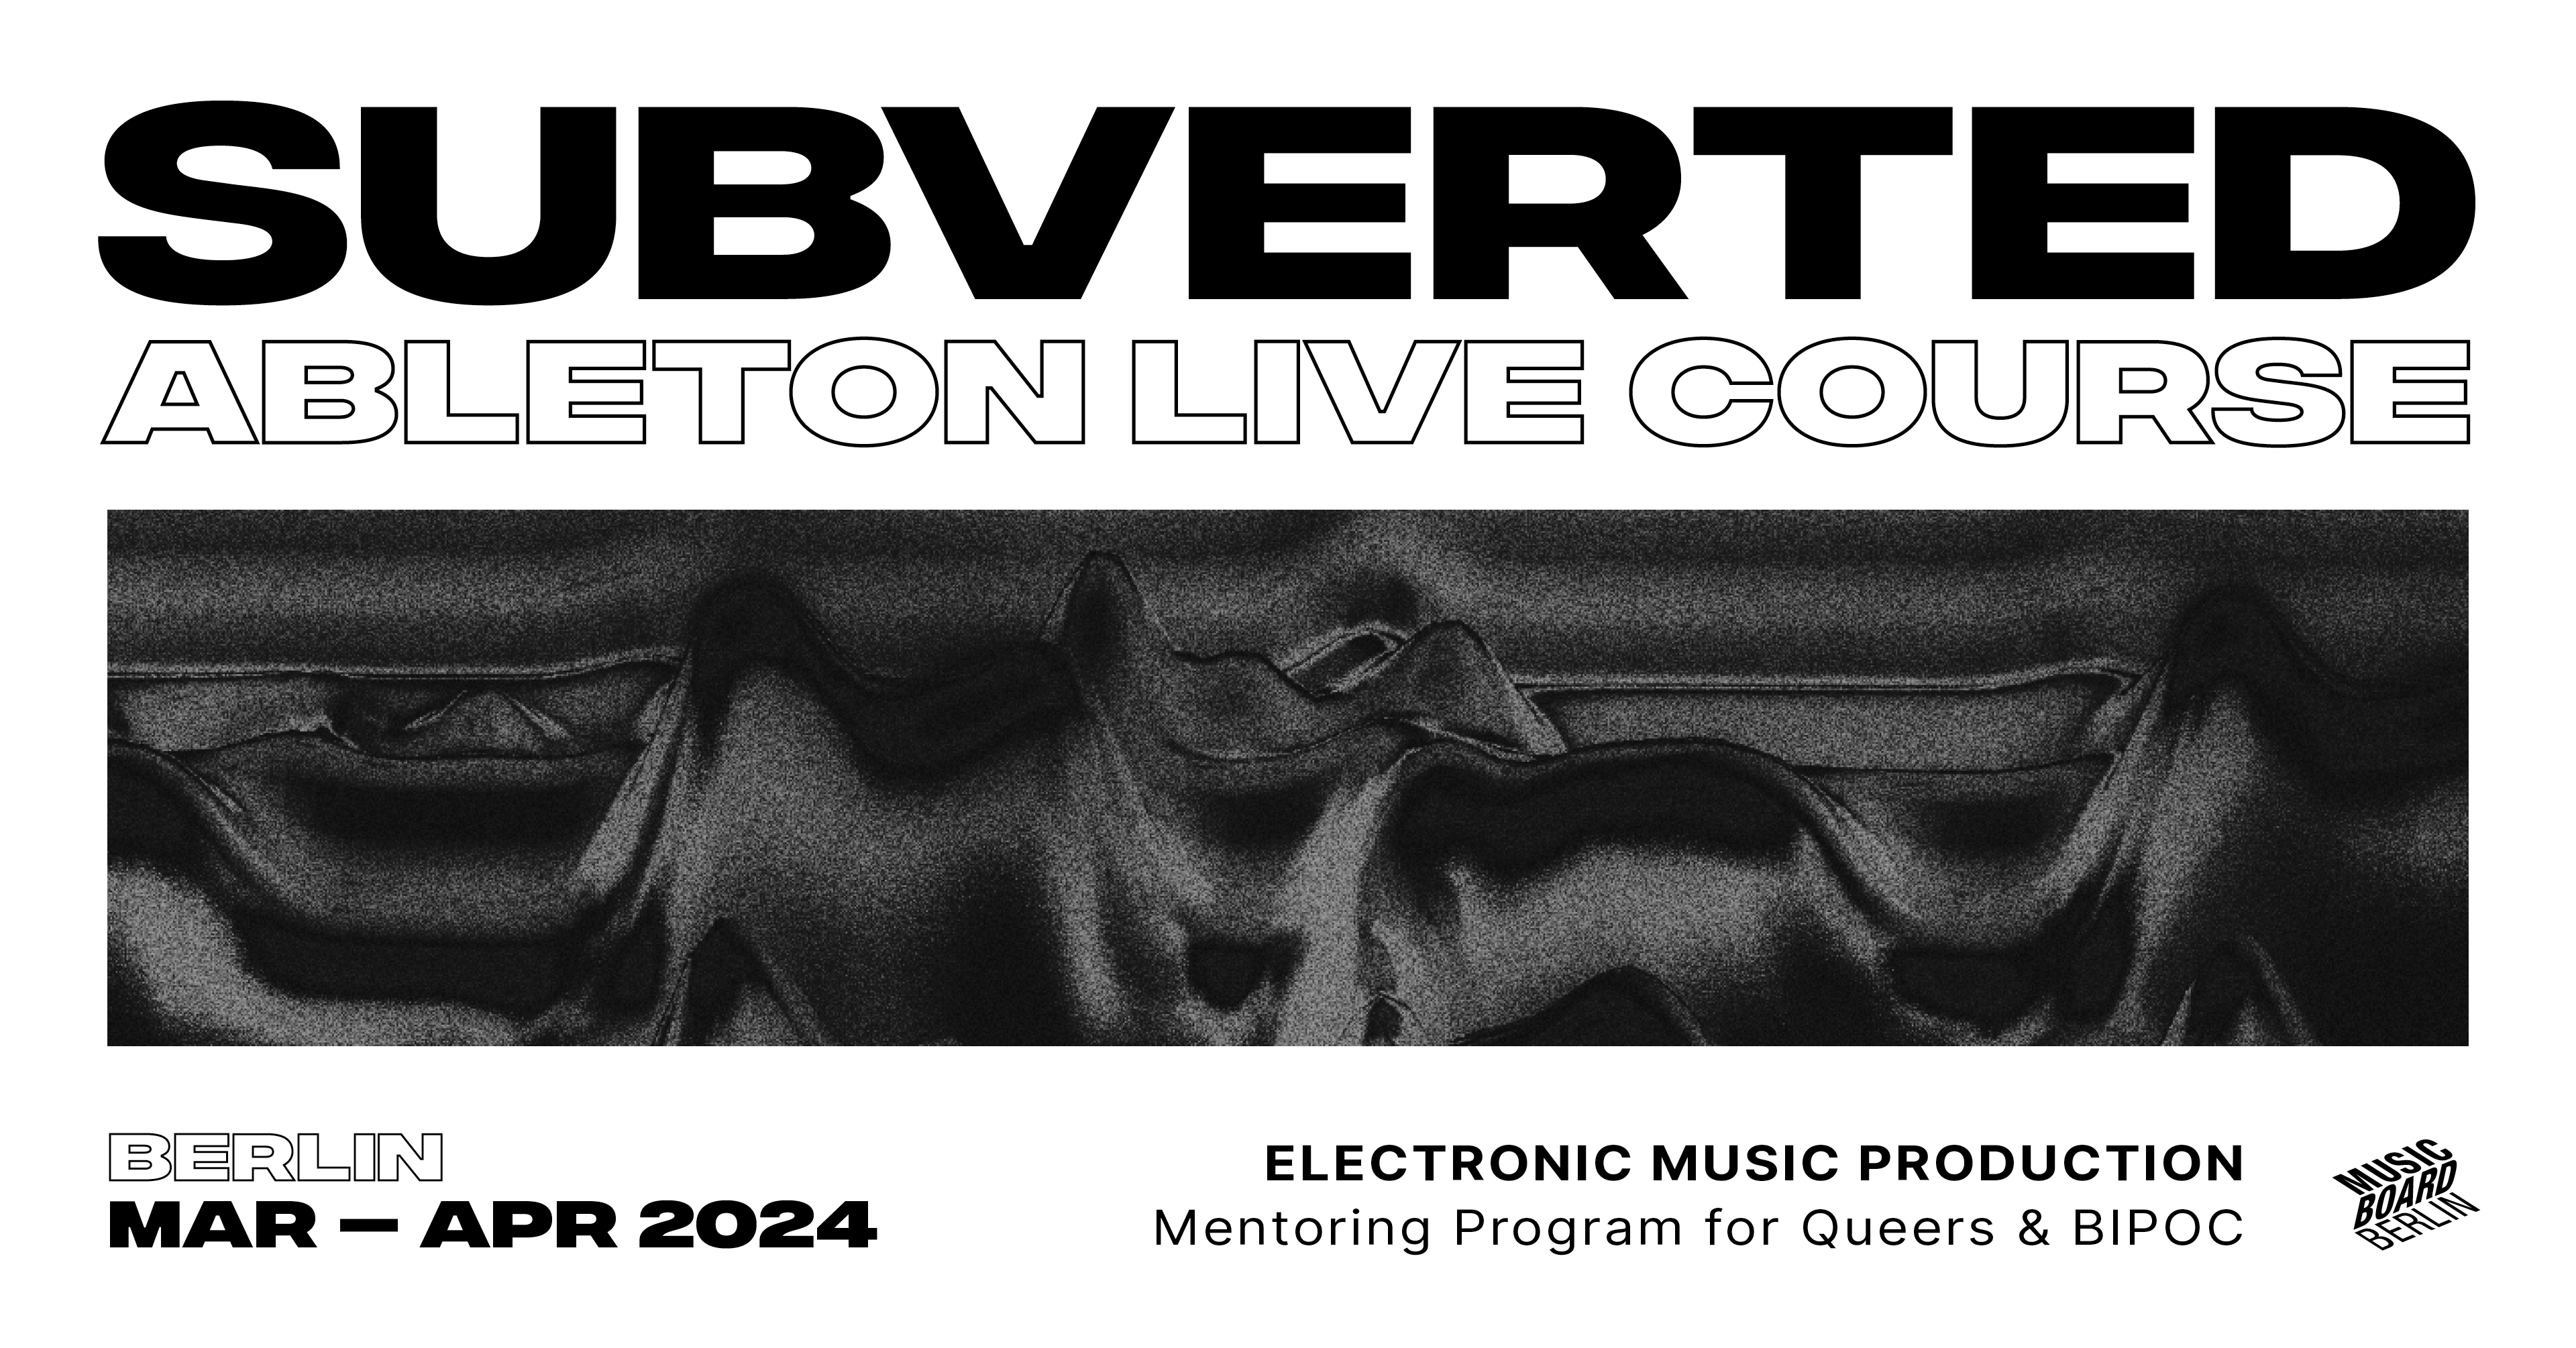 Subverted. Ableton Live Course for Queers and BIPOC - フライヤー表